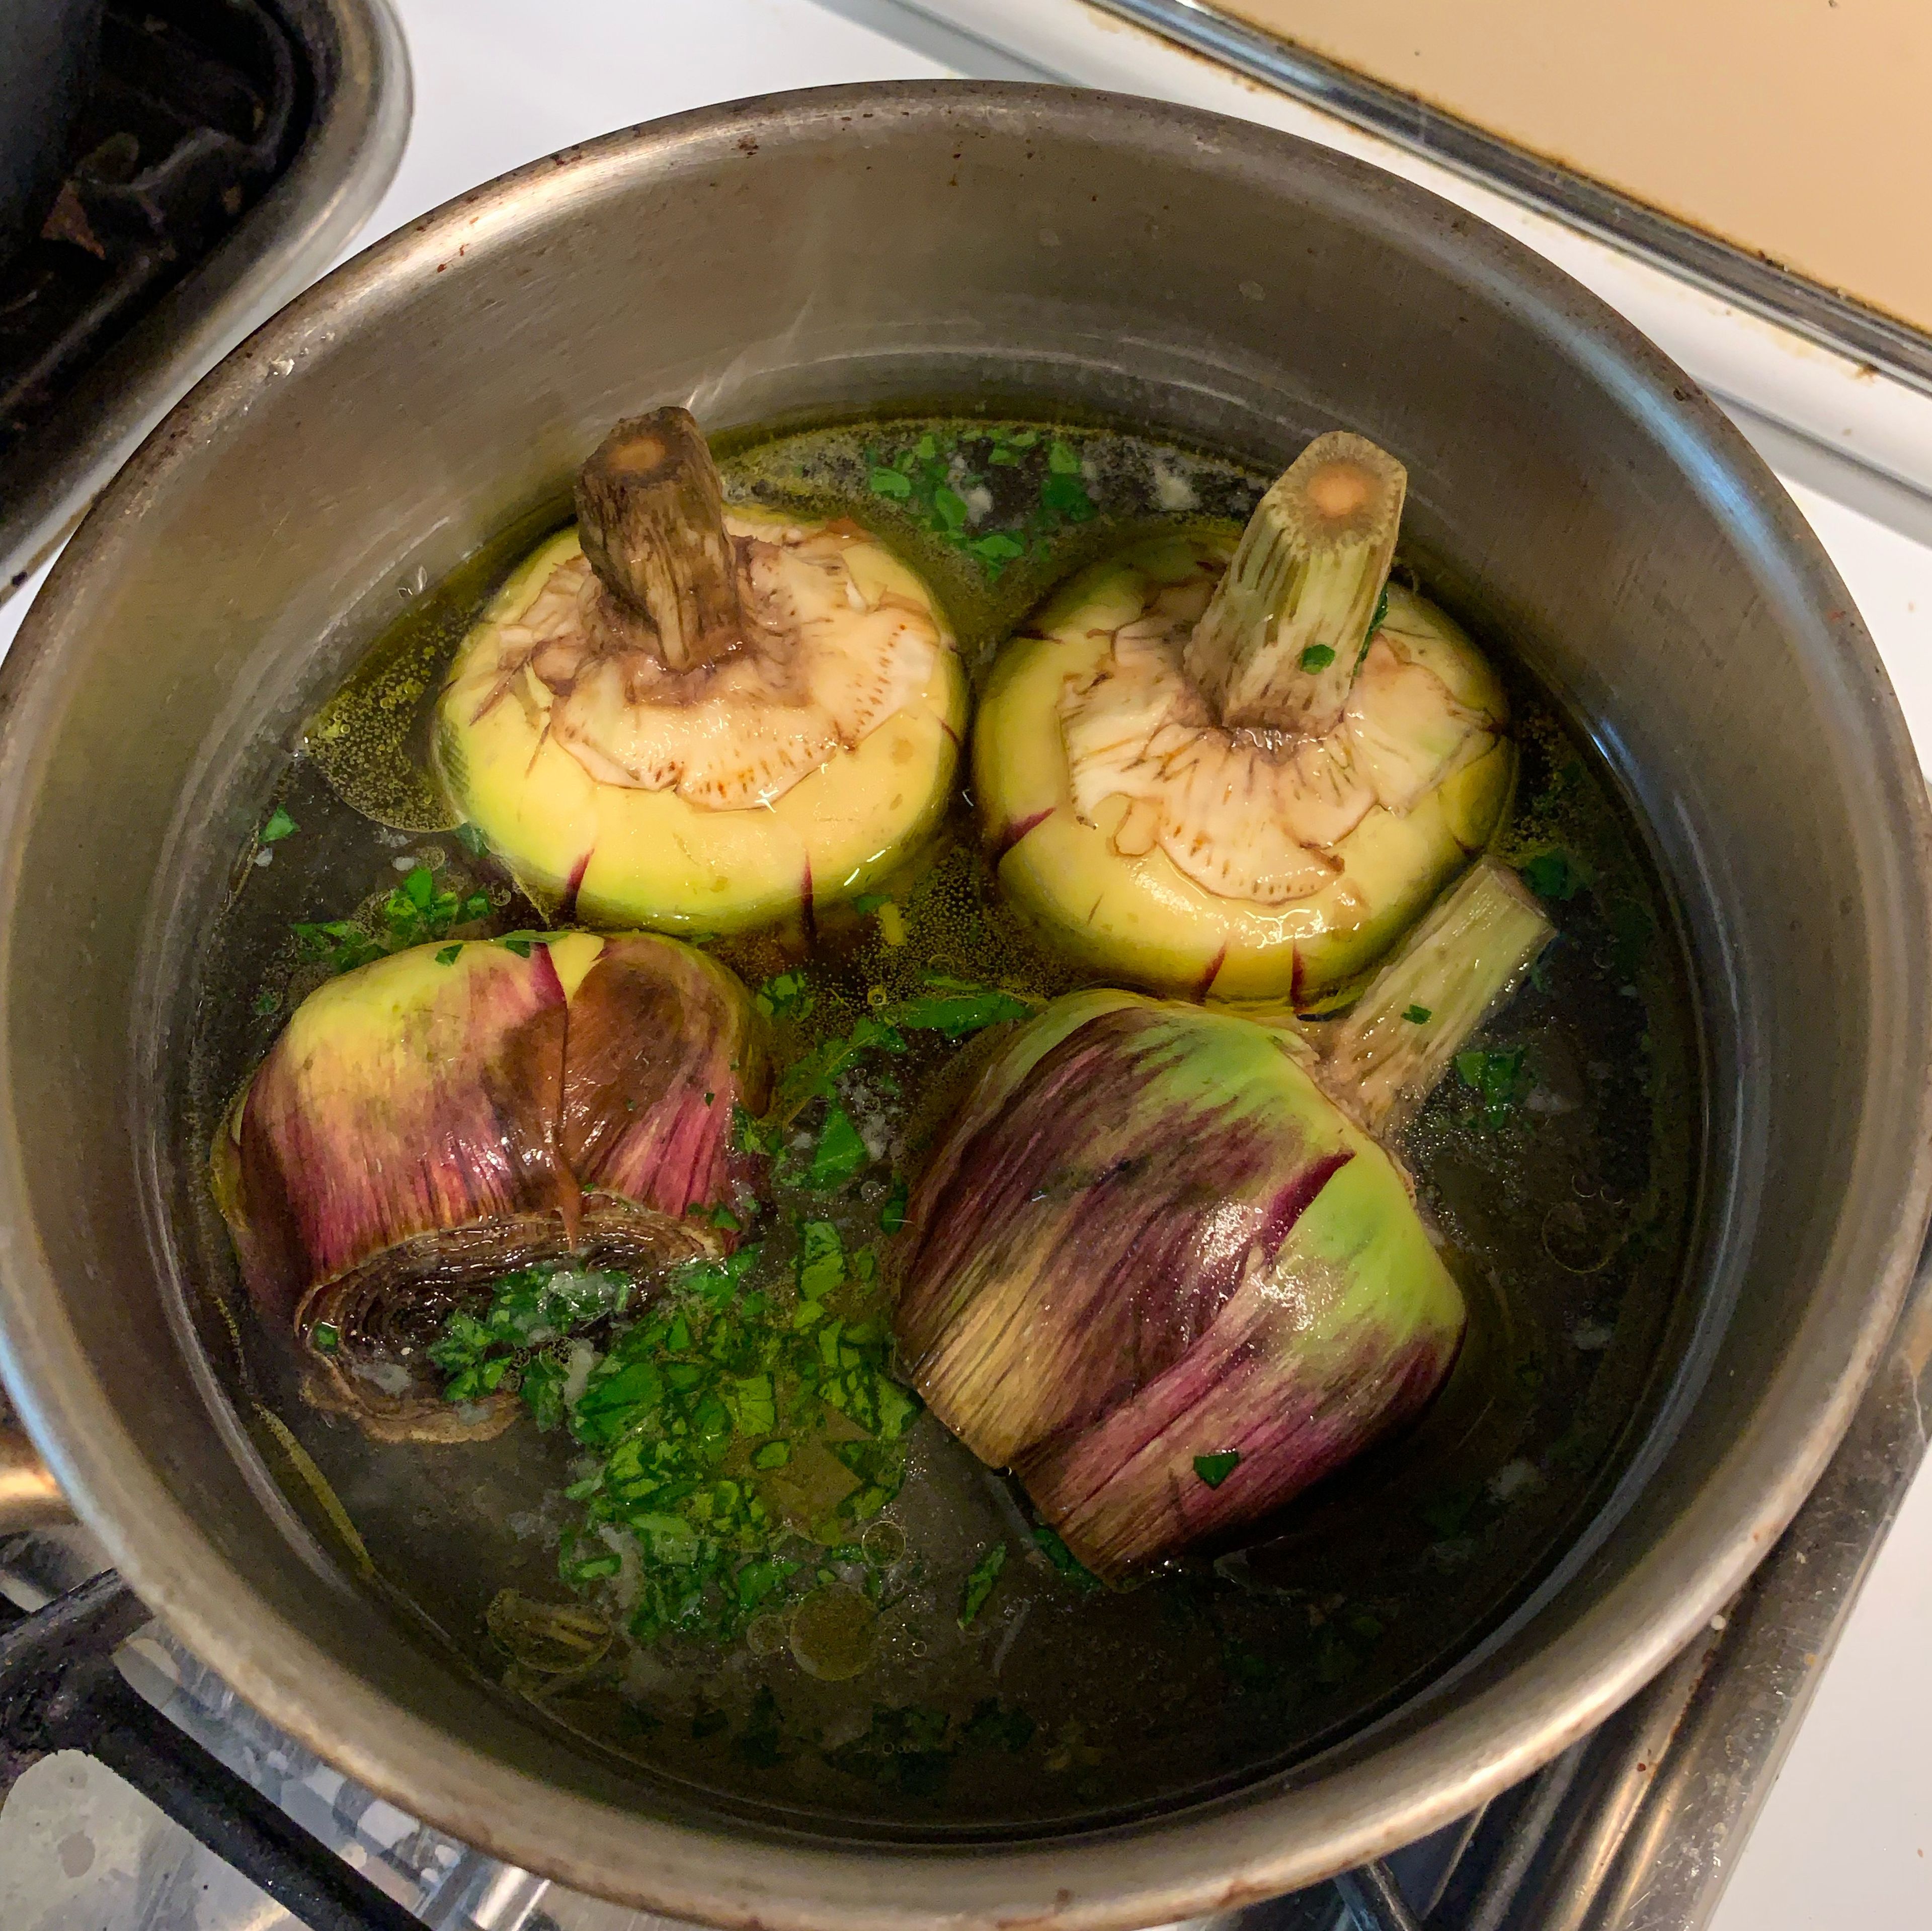 Take a small pan, because we need to keep artichokes pretty close to each other and don't let them fall. Put 4 artichokes heads down in the pan and pour half of the water, then add olive oil and the remaining water. Cover with the lid and over the medium heat let them cook for 30 min. Don't open the lid while it's cooking. After 30 min if you see that the artichokes are a little bit tender, let them simmer for another 5-10 min.